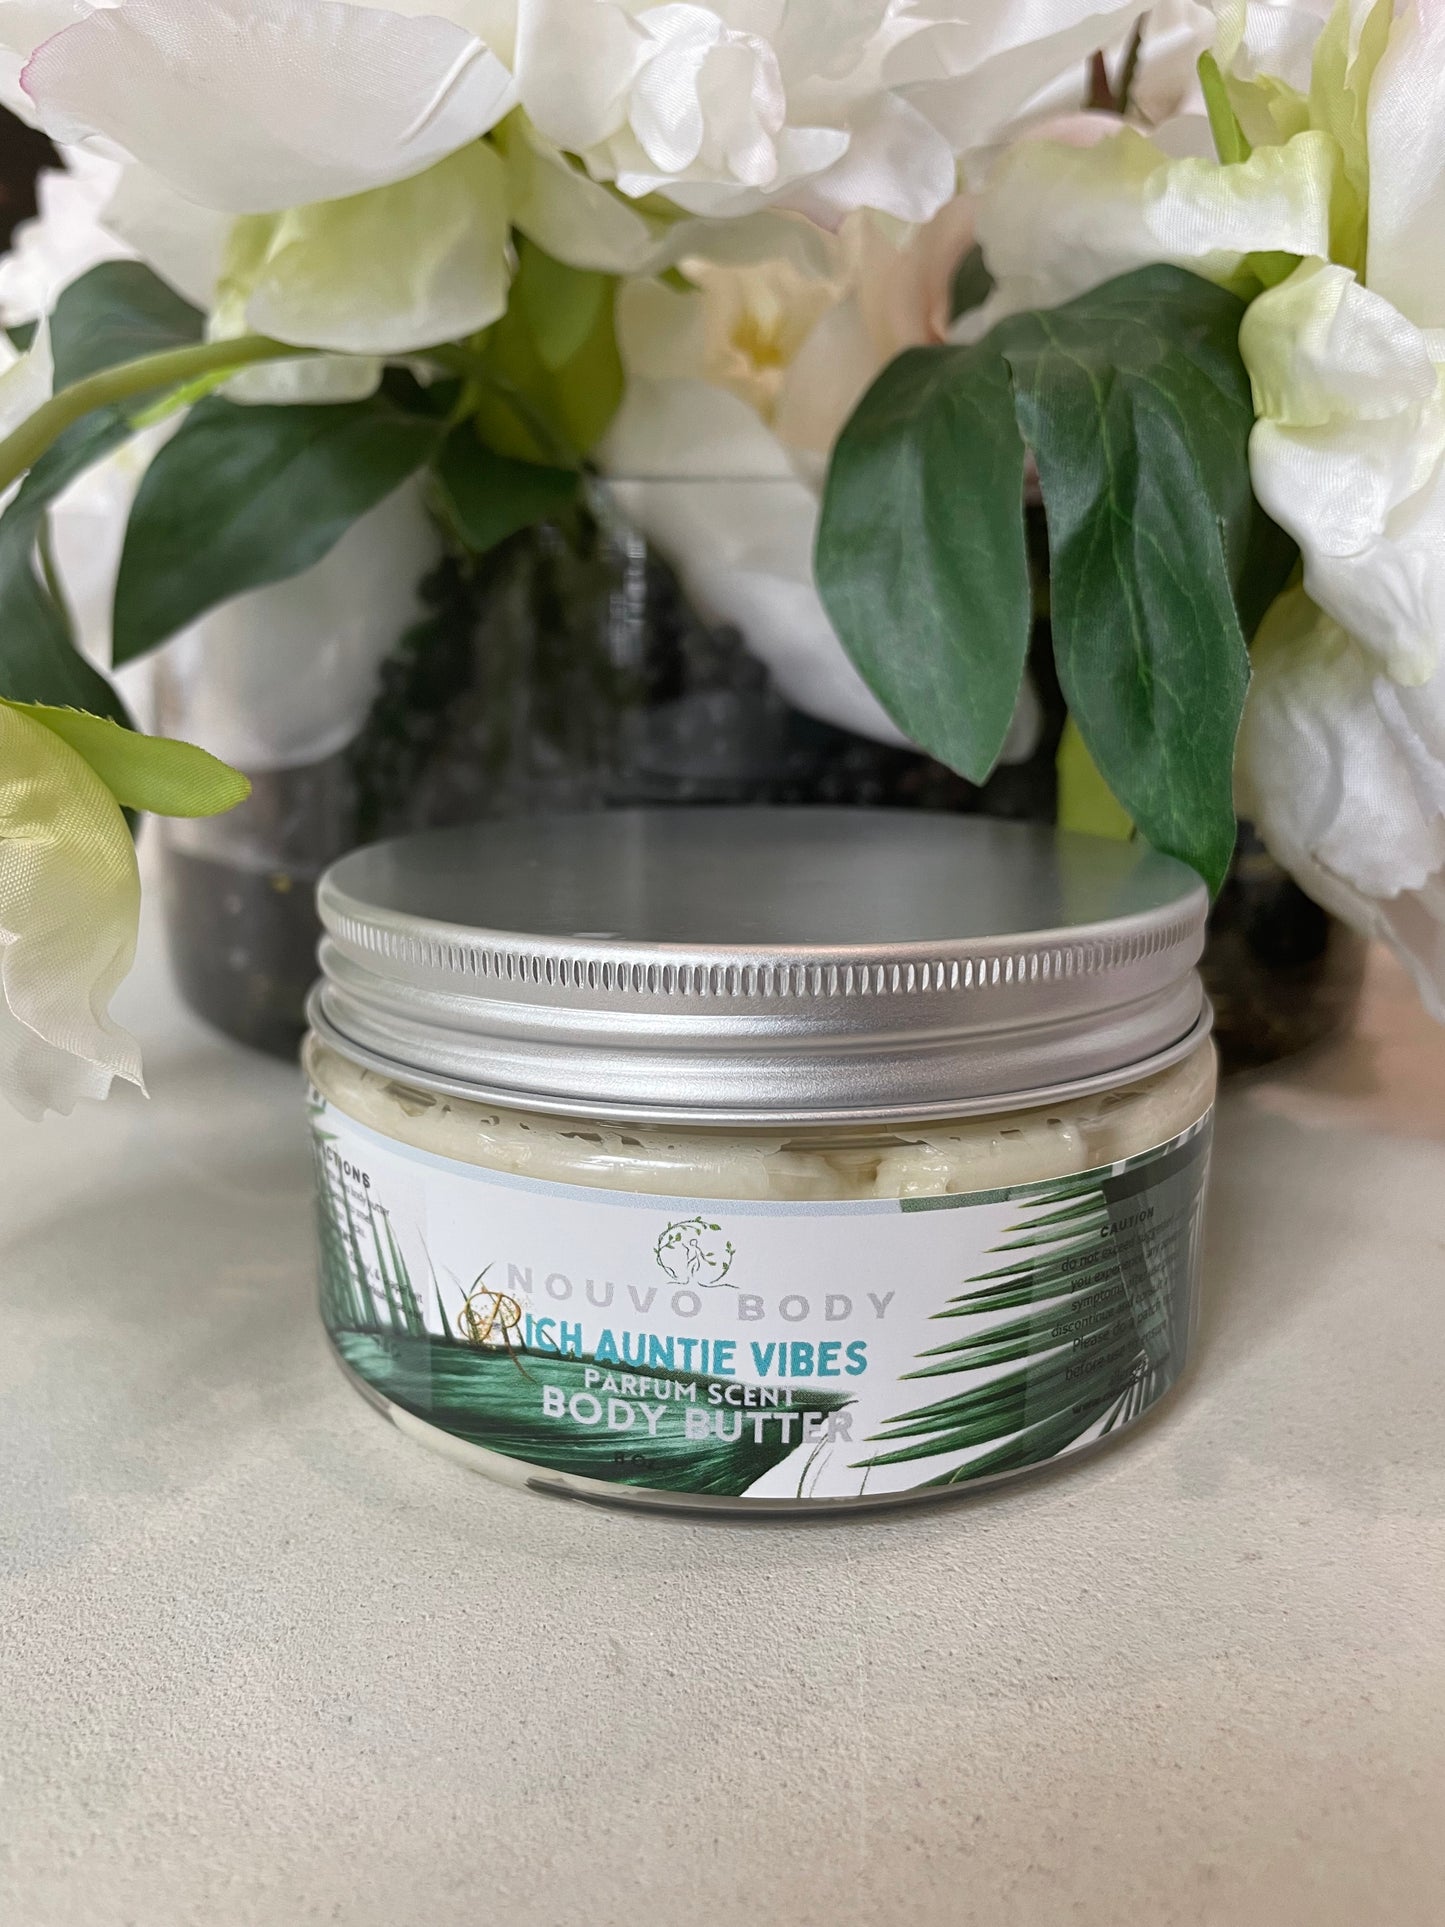 Rich Auntie vibes -Perfume Oil Scent Body Butter (parfum)